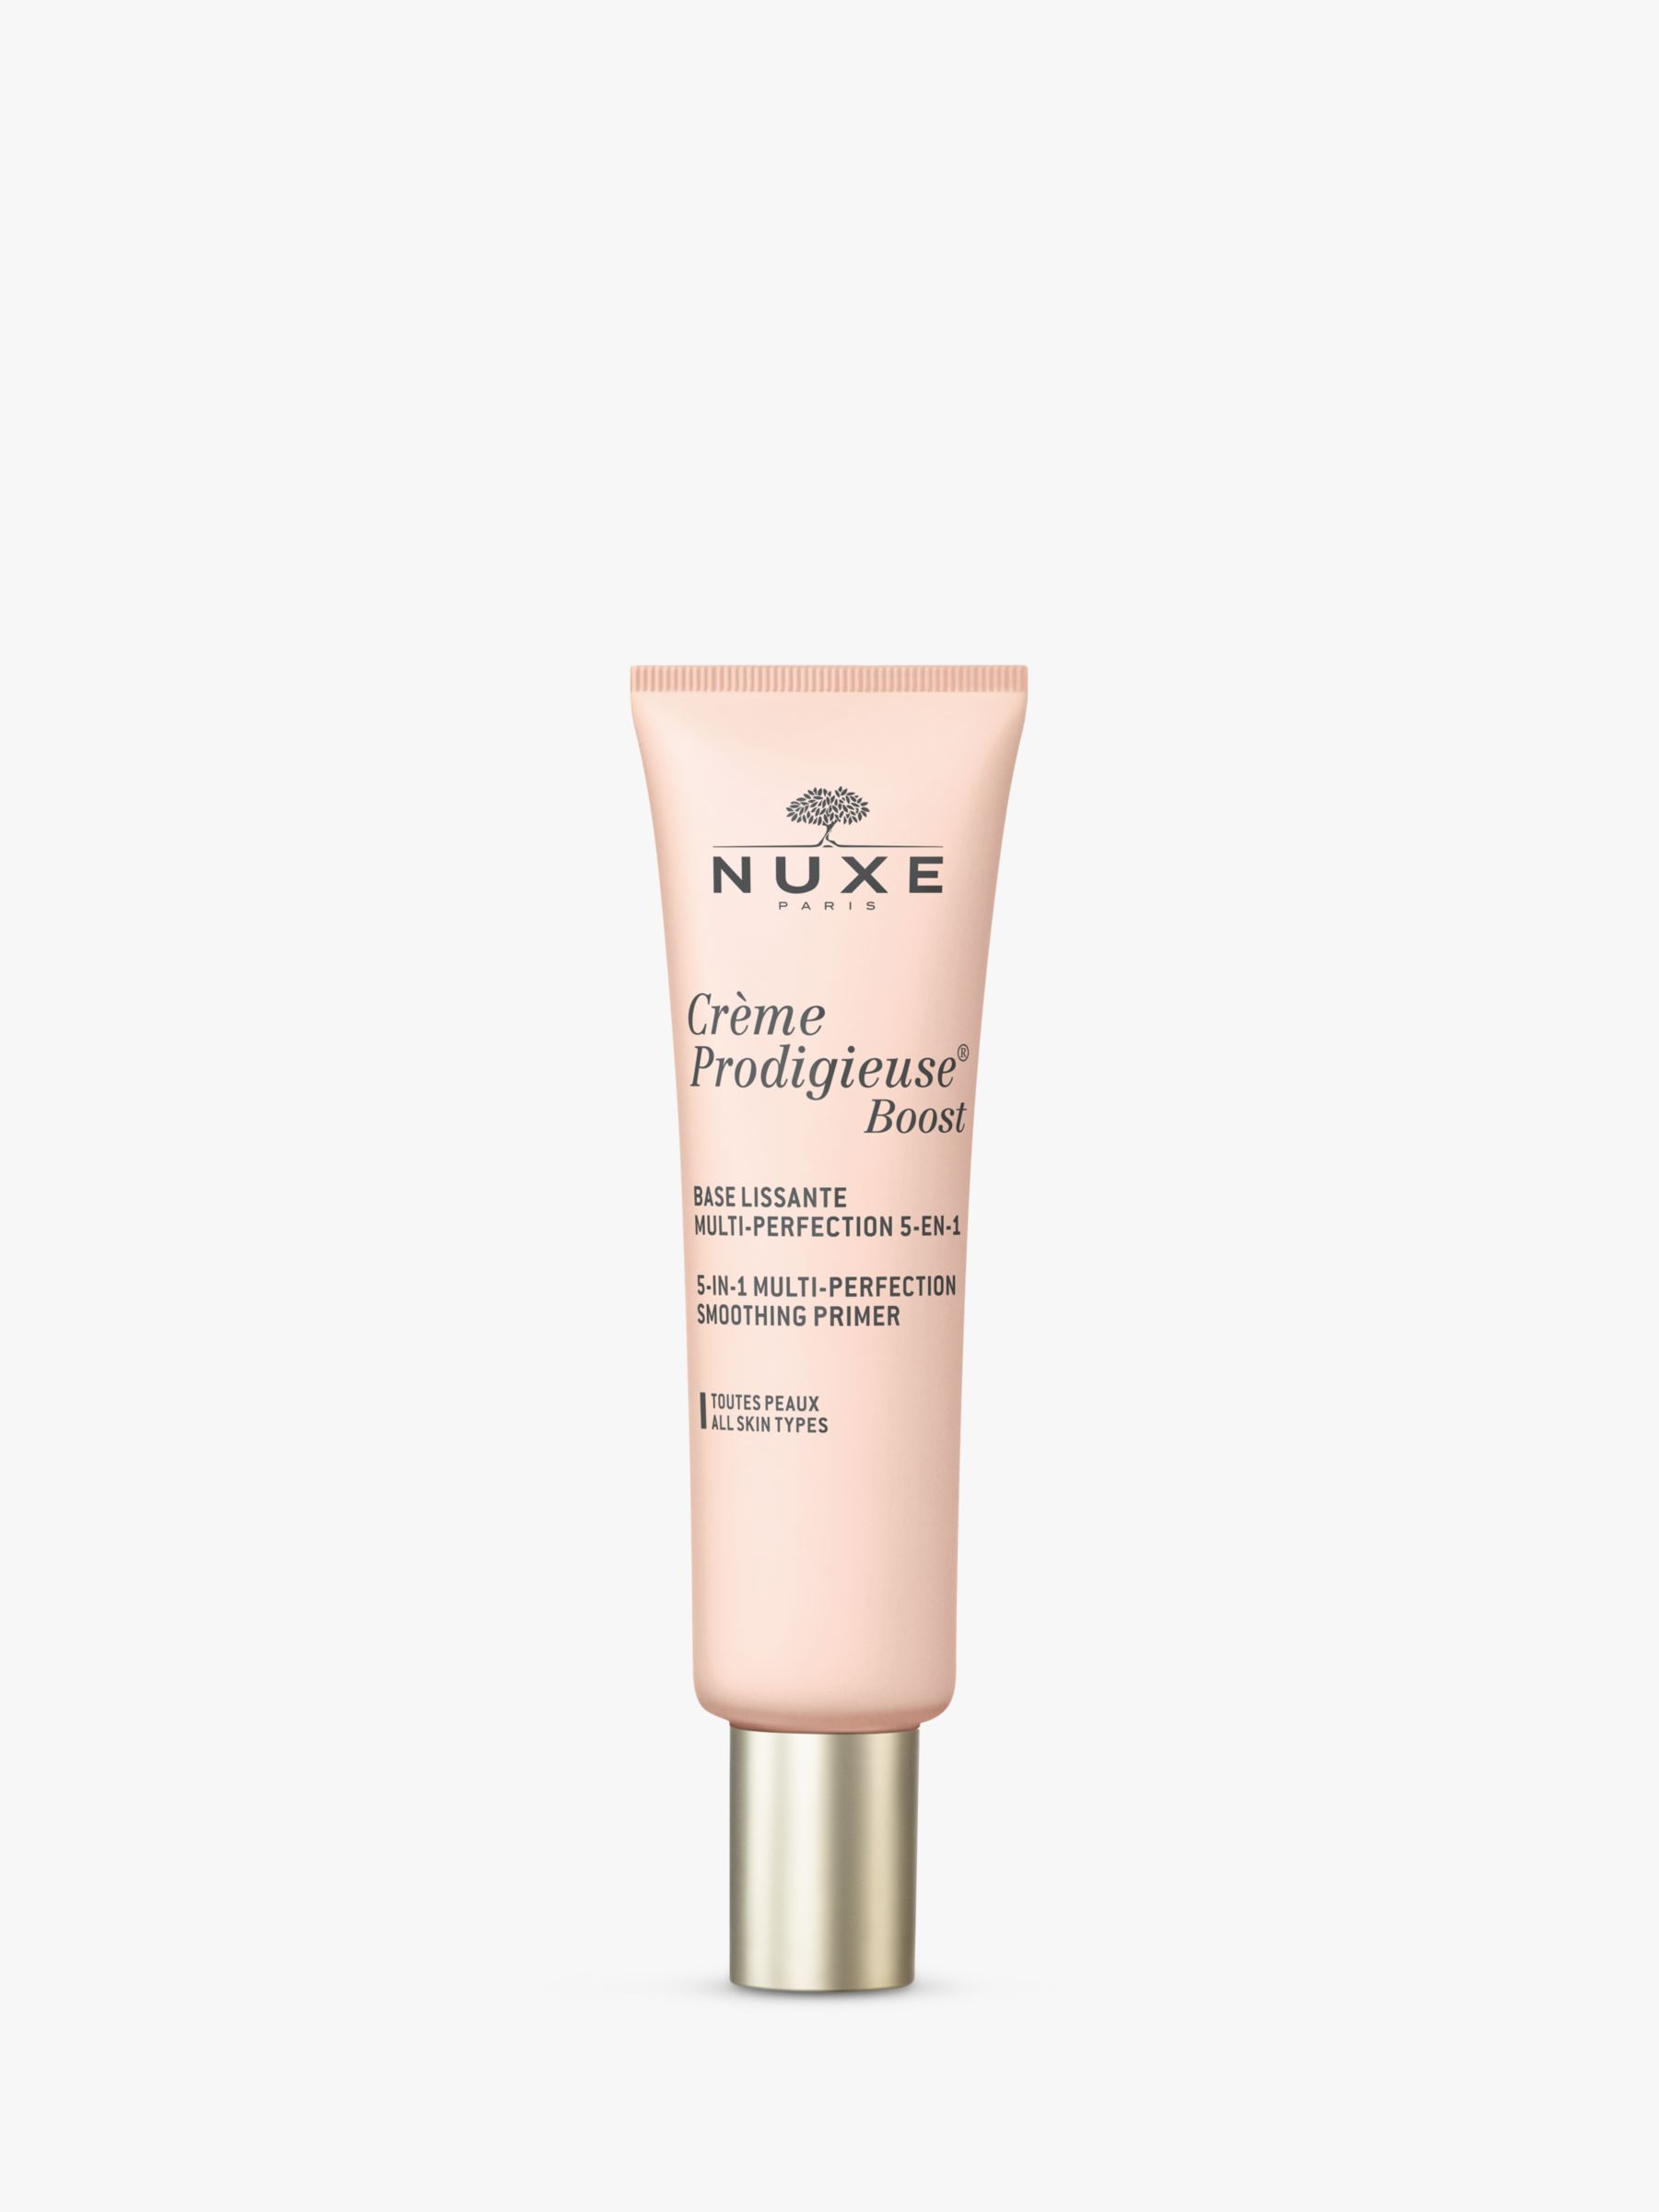 NUXE Crème Prodigieux® 5-In-1 Multi-Perfection Smoothing Primer, 30ml